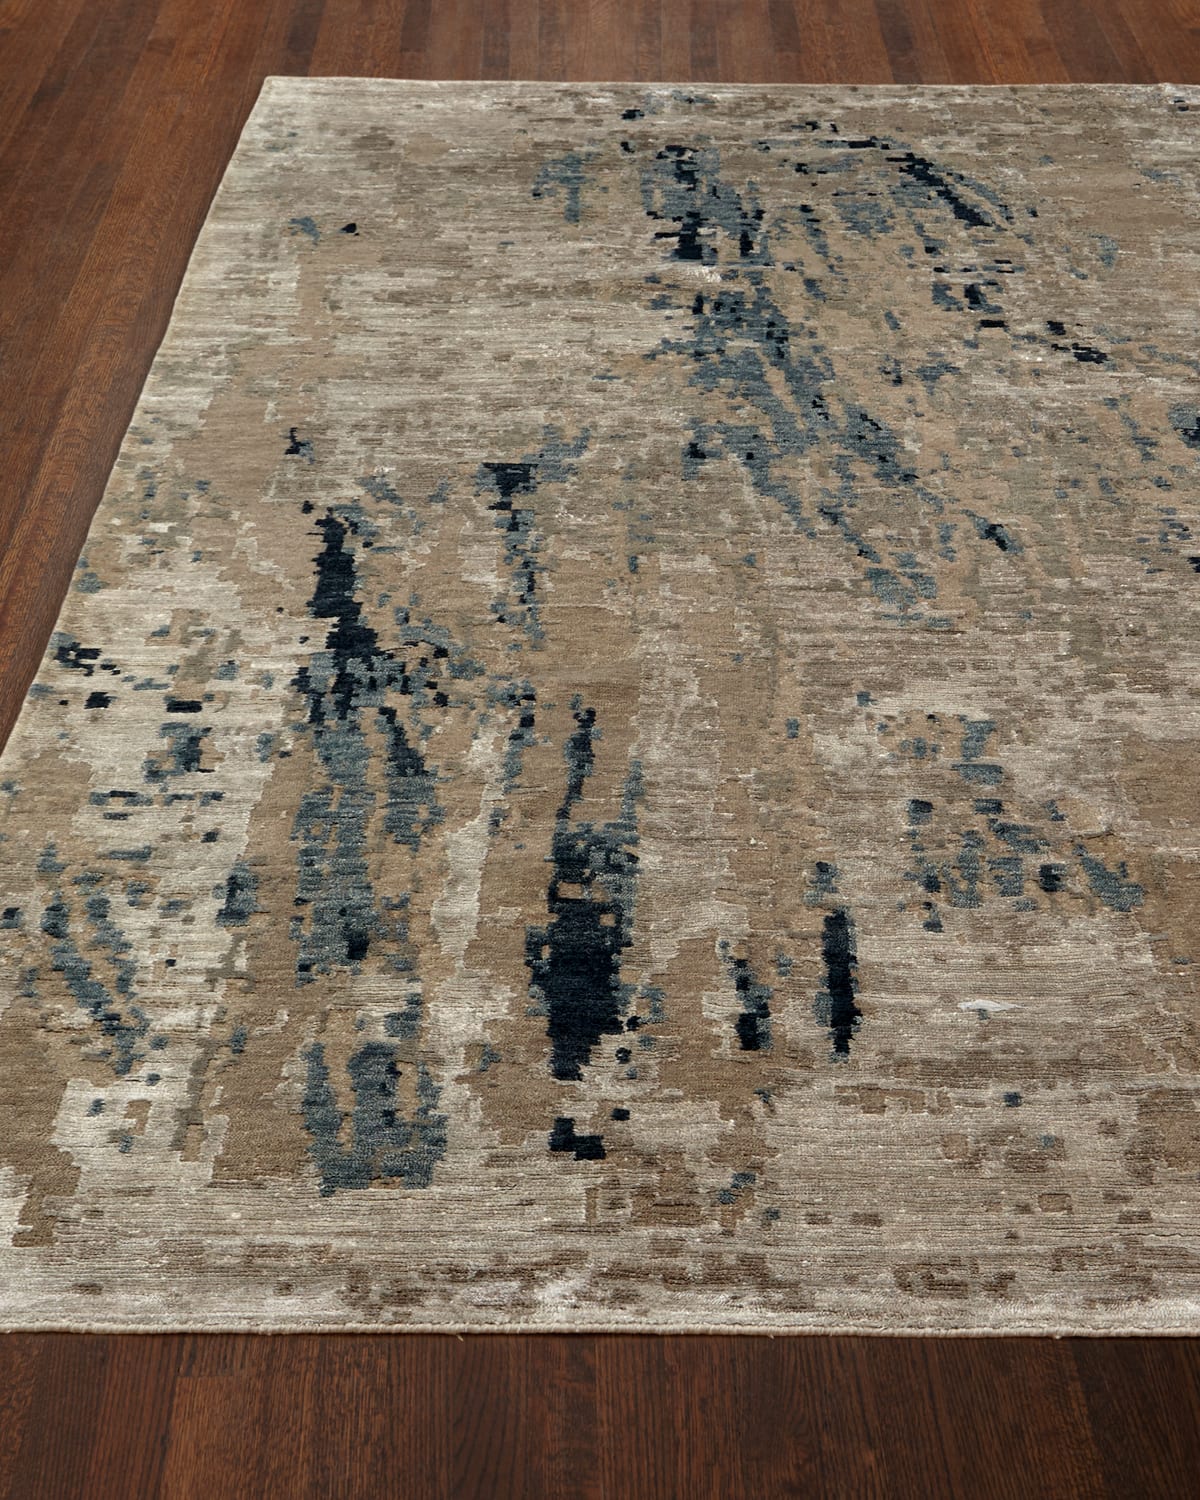 Ursula Hand Knotted Rug, 8' x 10'